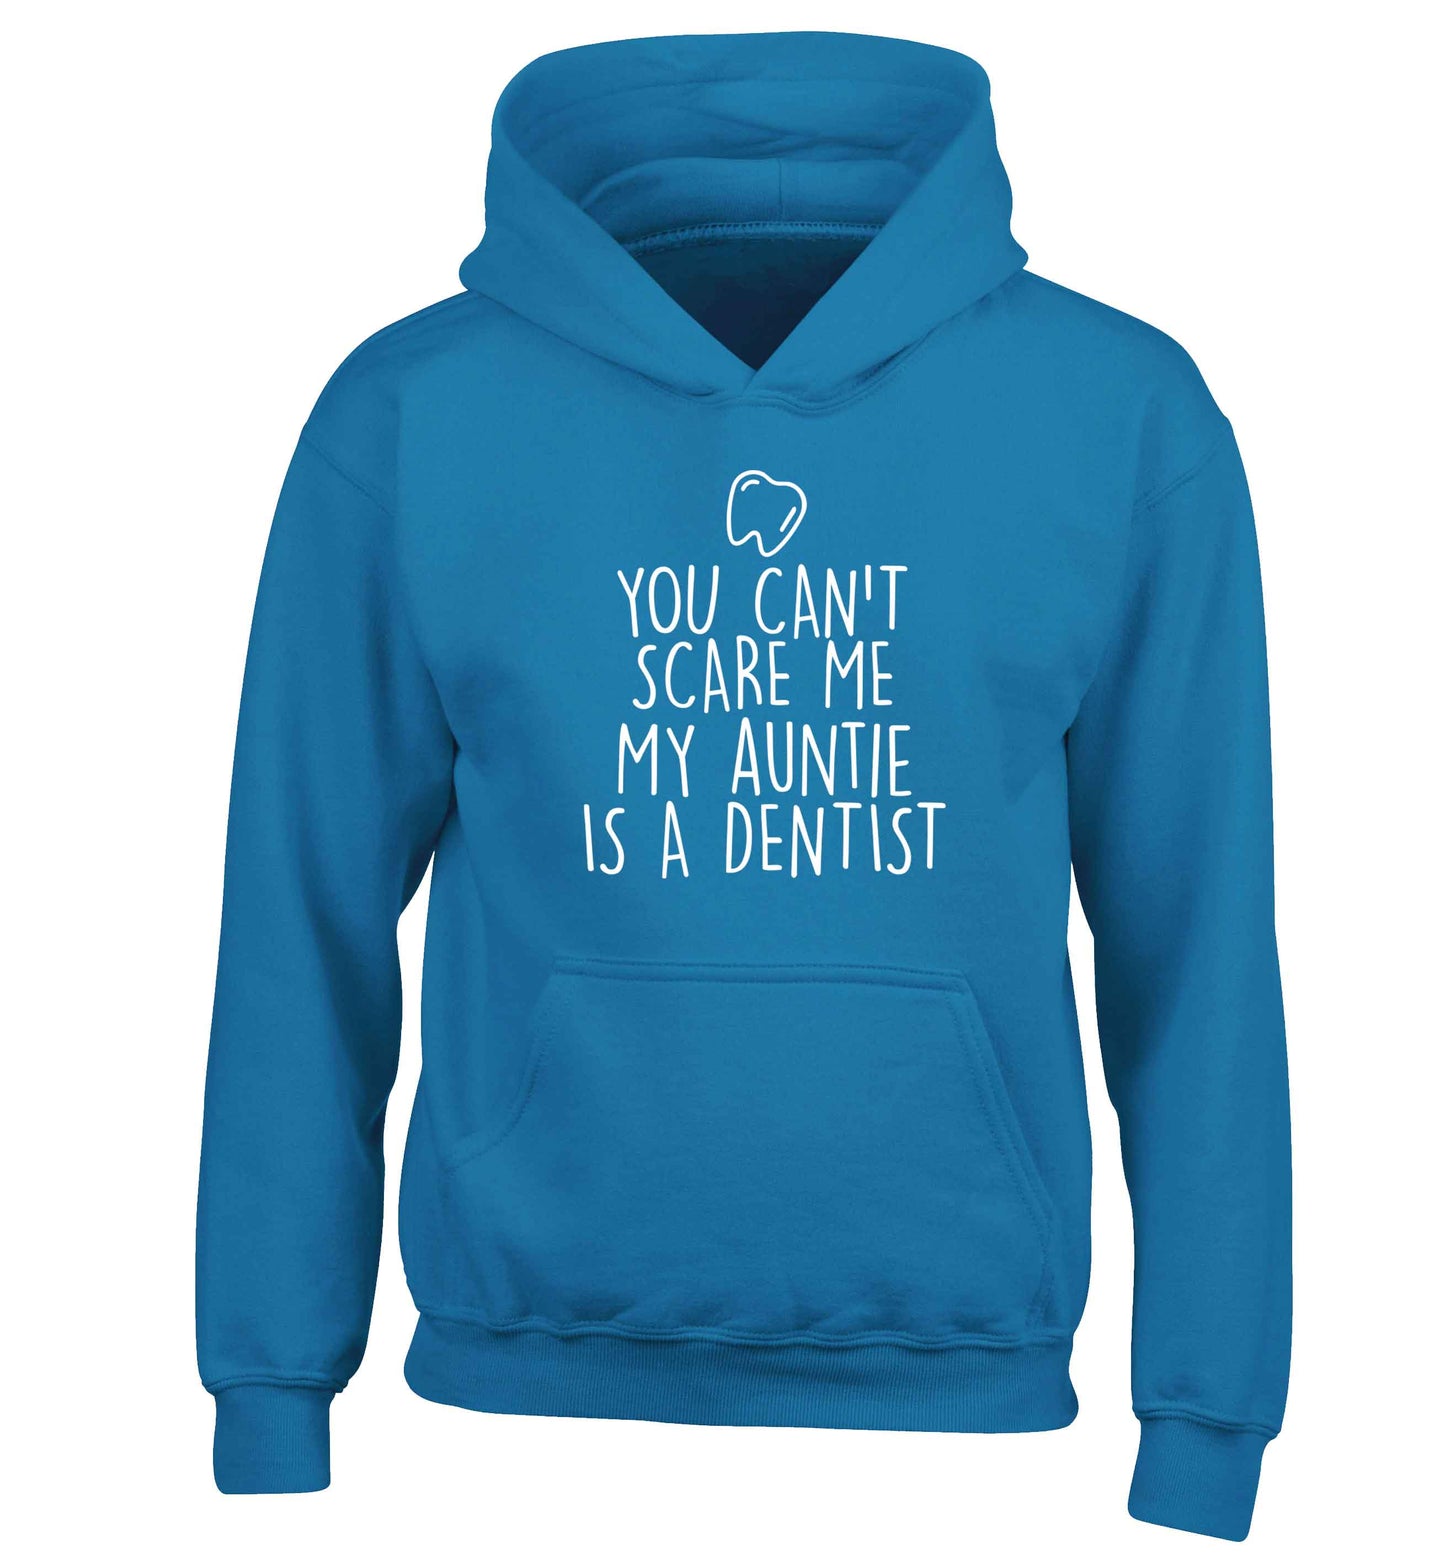 You can't scare me my auntie is a dentist children's blue hoodie 12-13 Years